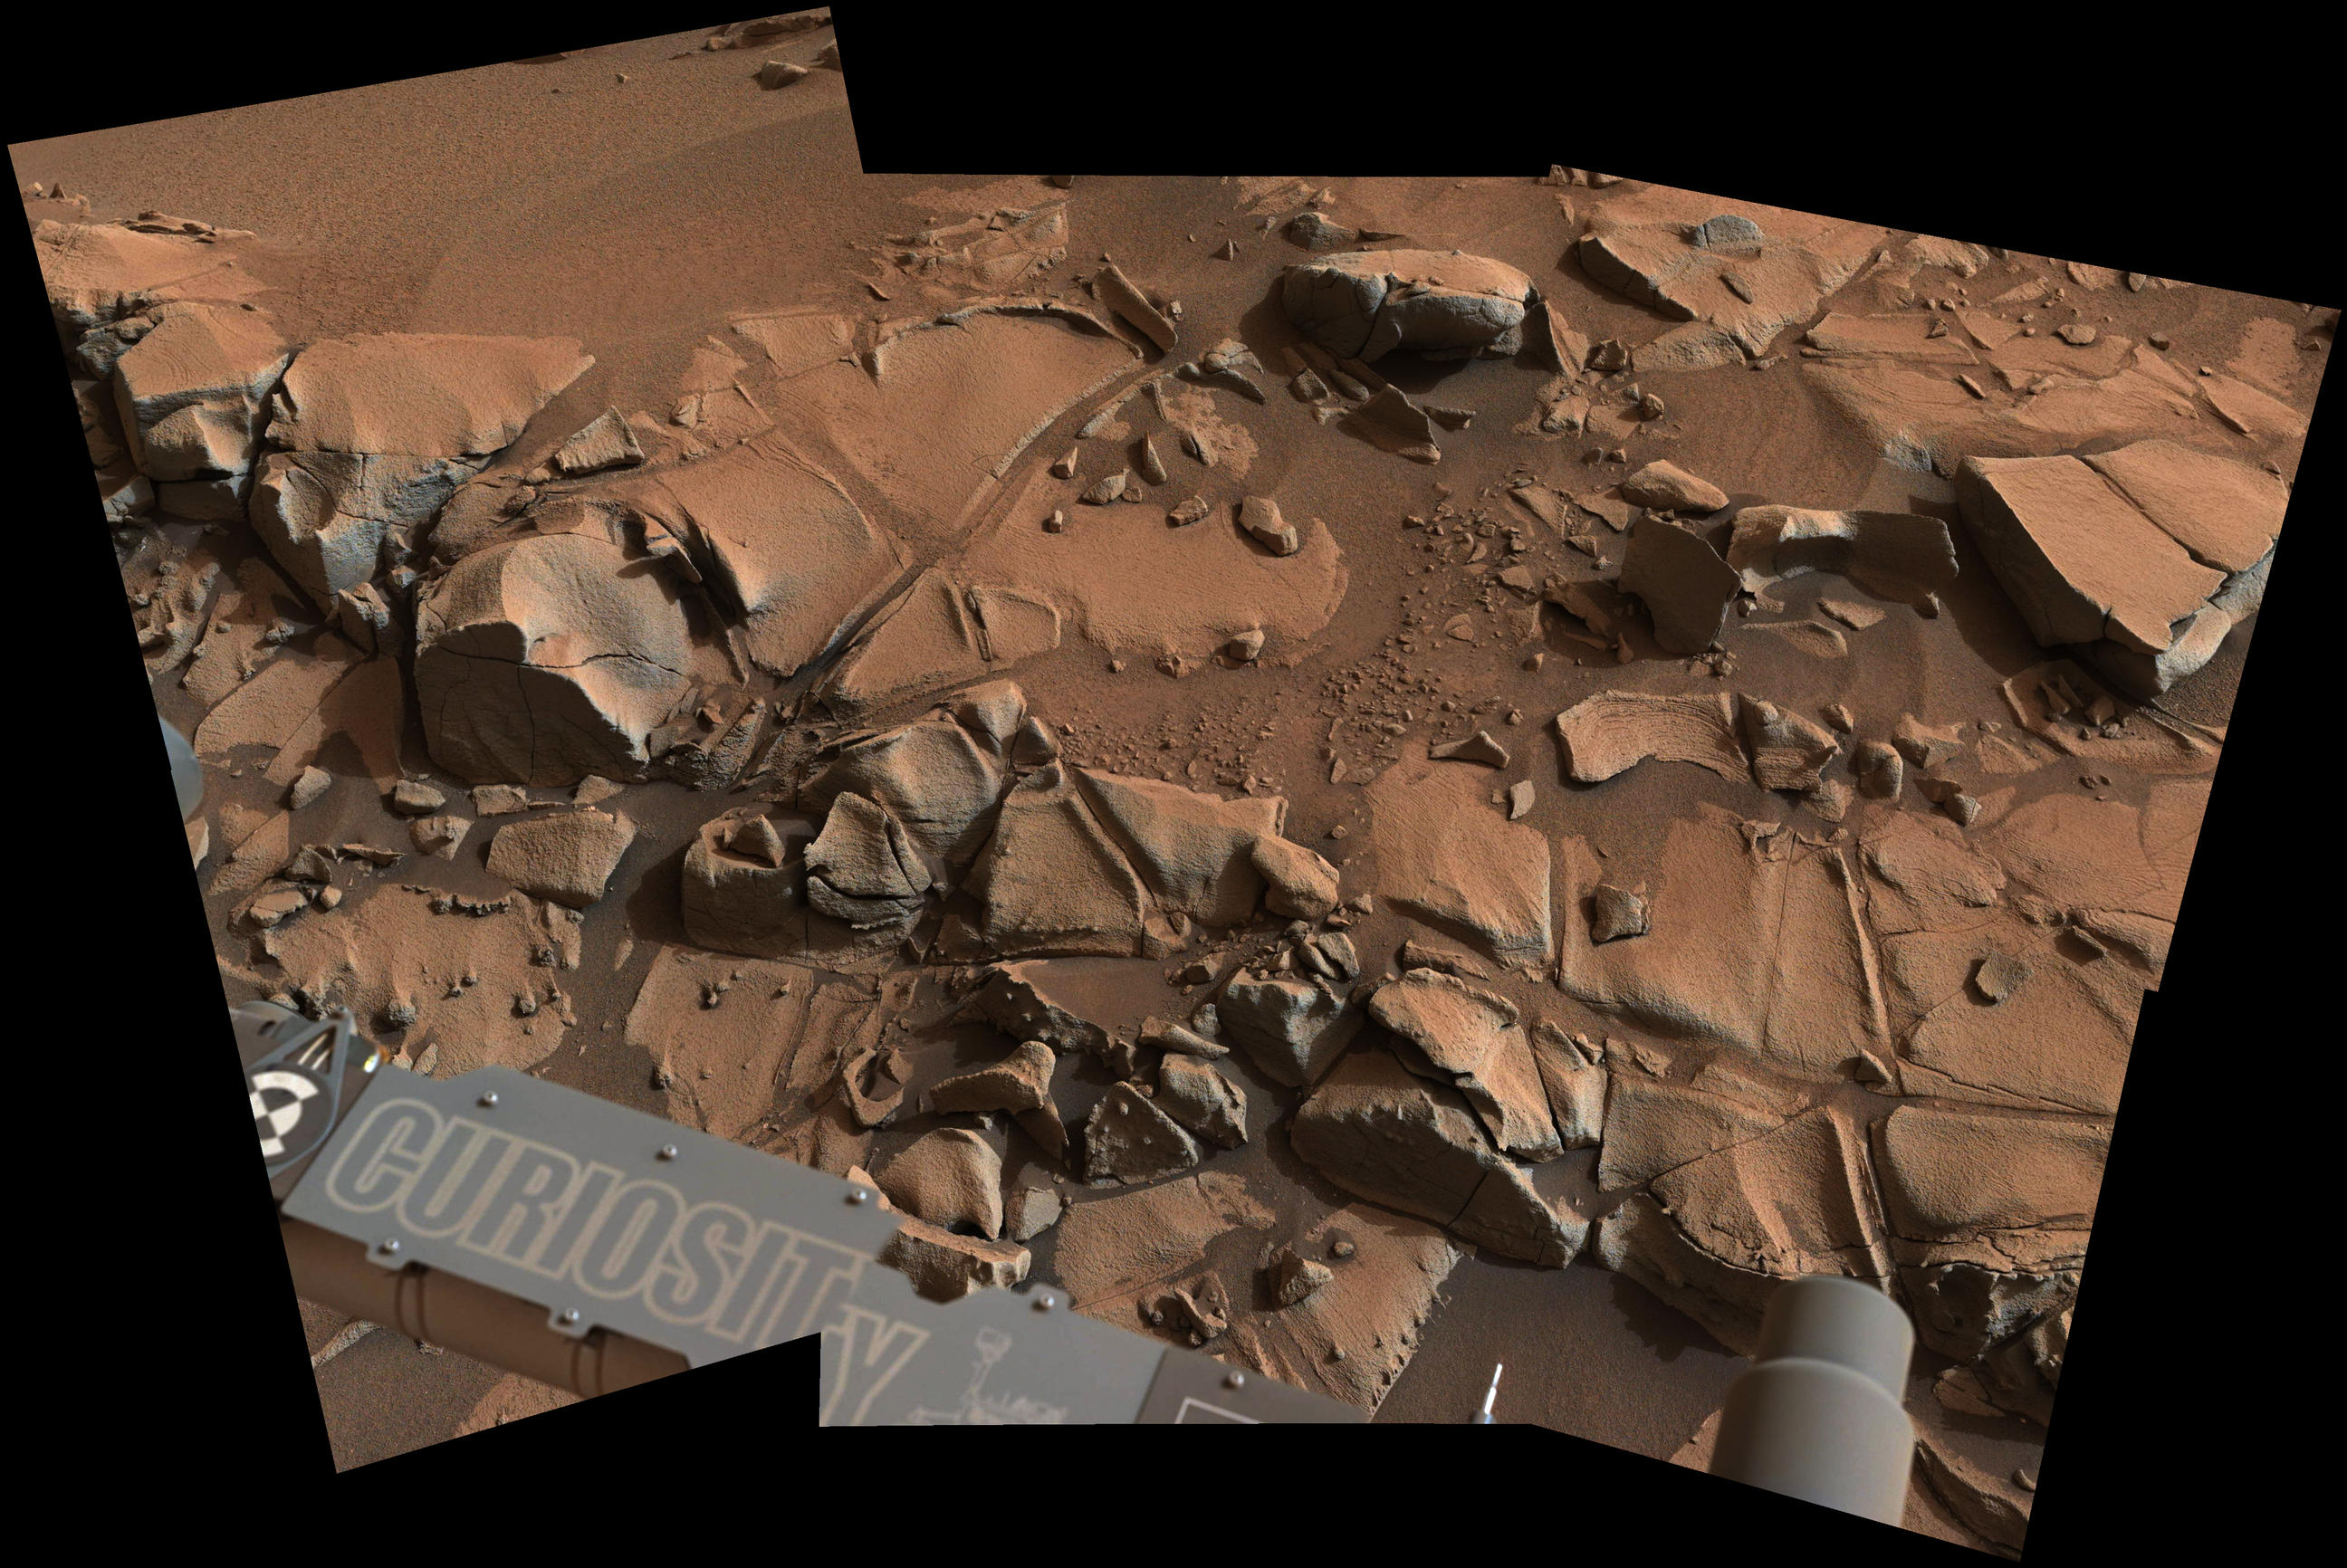 This view from the Mast Camera (Mastcam) on NASA's Curiosity Mars rover shows a swath of bedrock called "Alexander Hills," which the rover approached for close-up inspection of selected targets. It is a mosaic of six frames taken on Nov. 23, 2014.